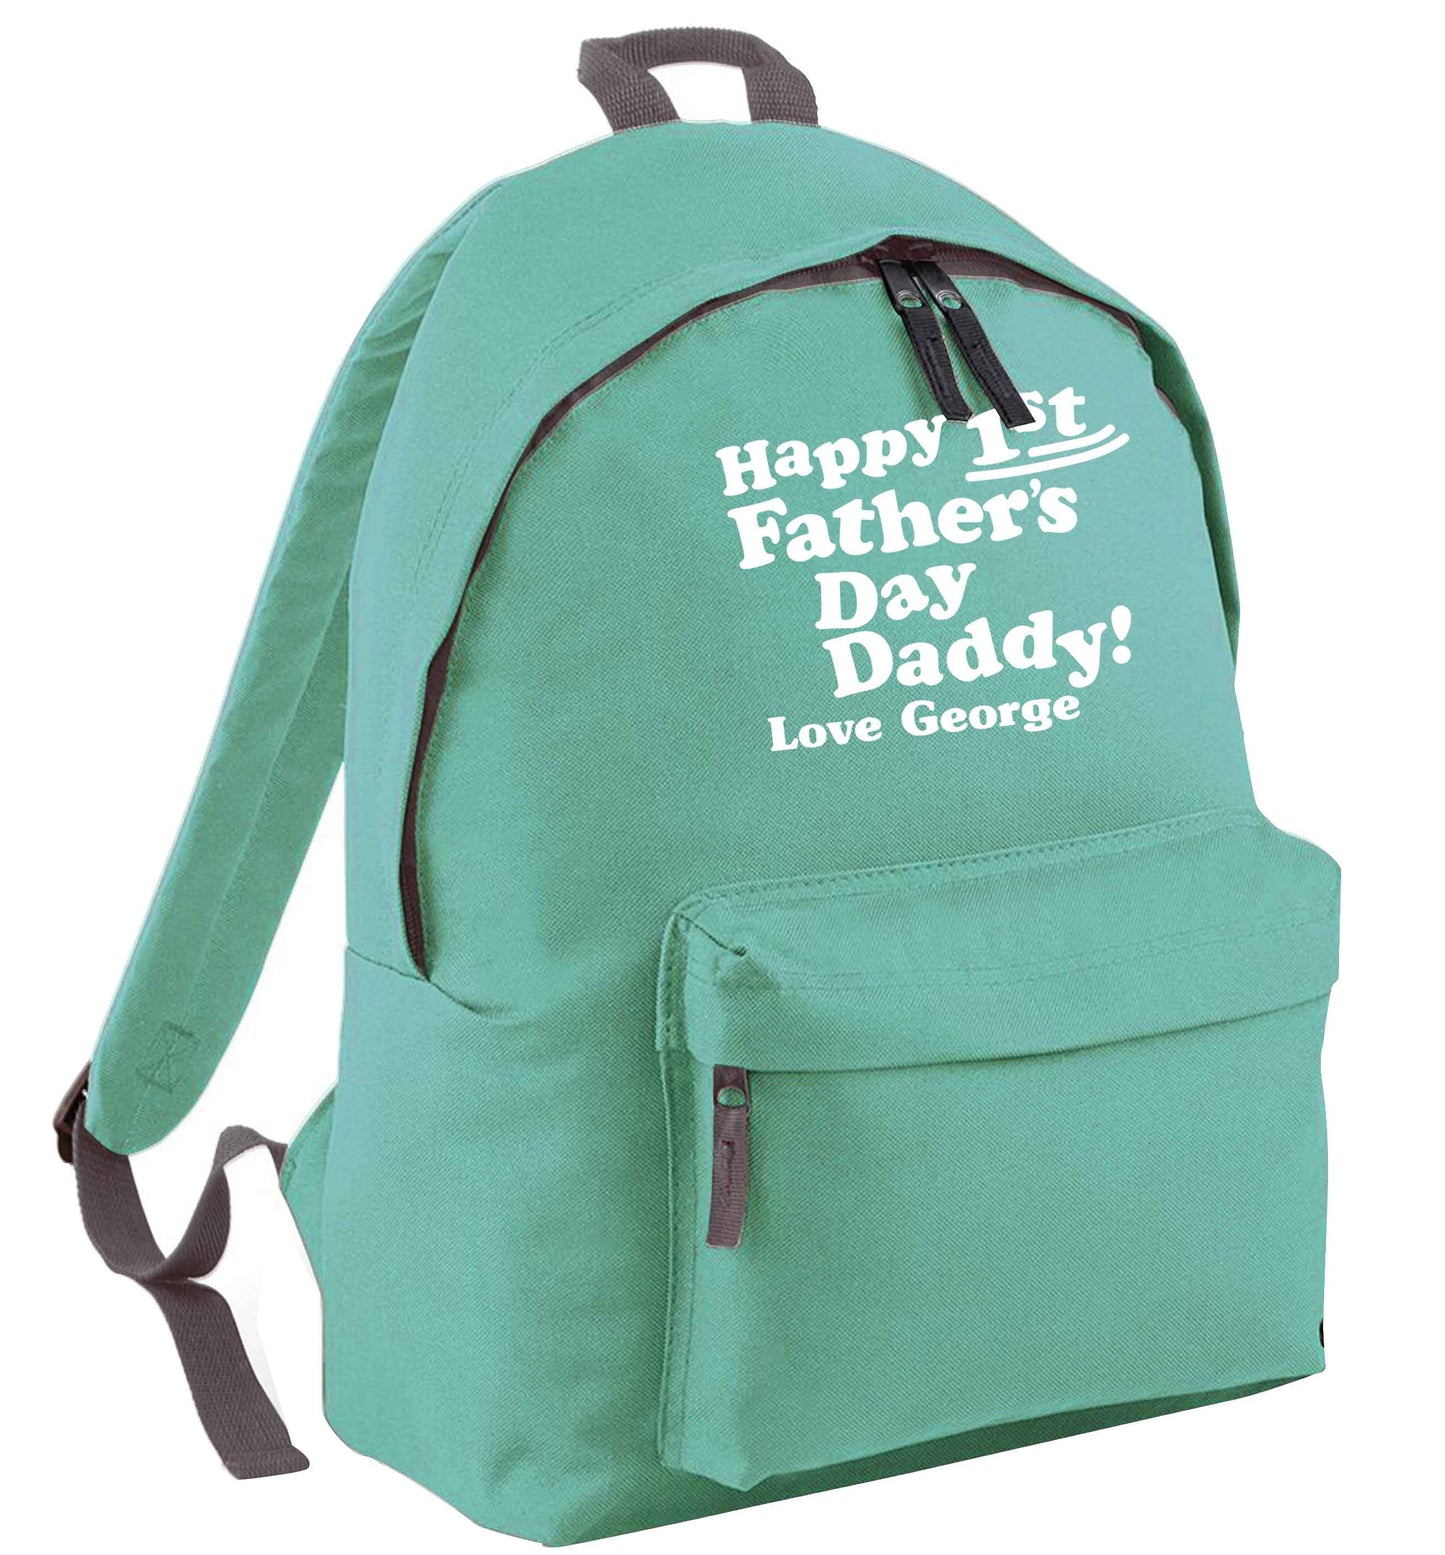 Happy first Fathers Day daddy love personalised mint adults backpack